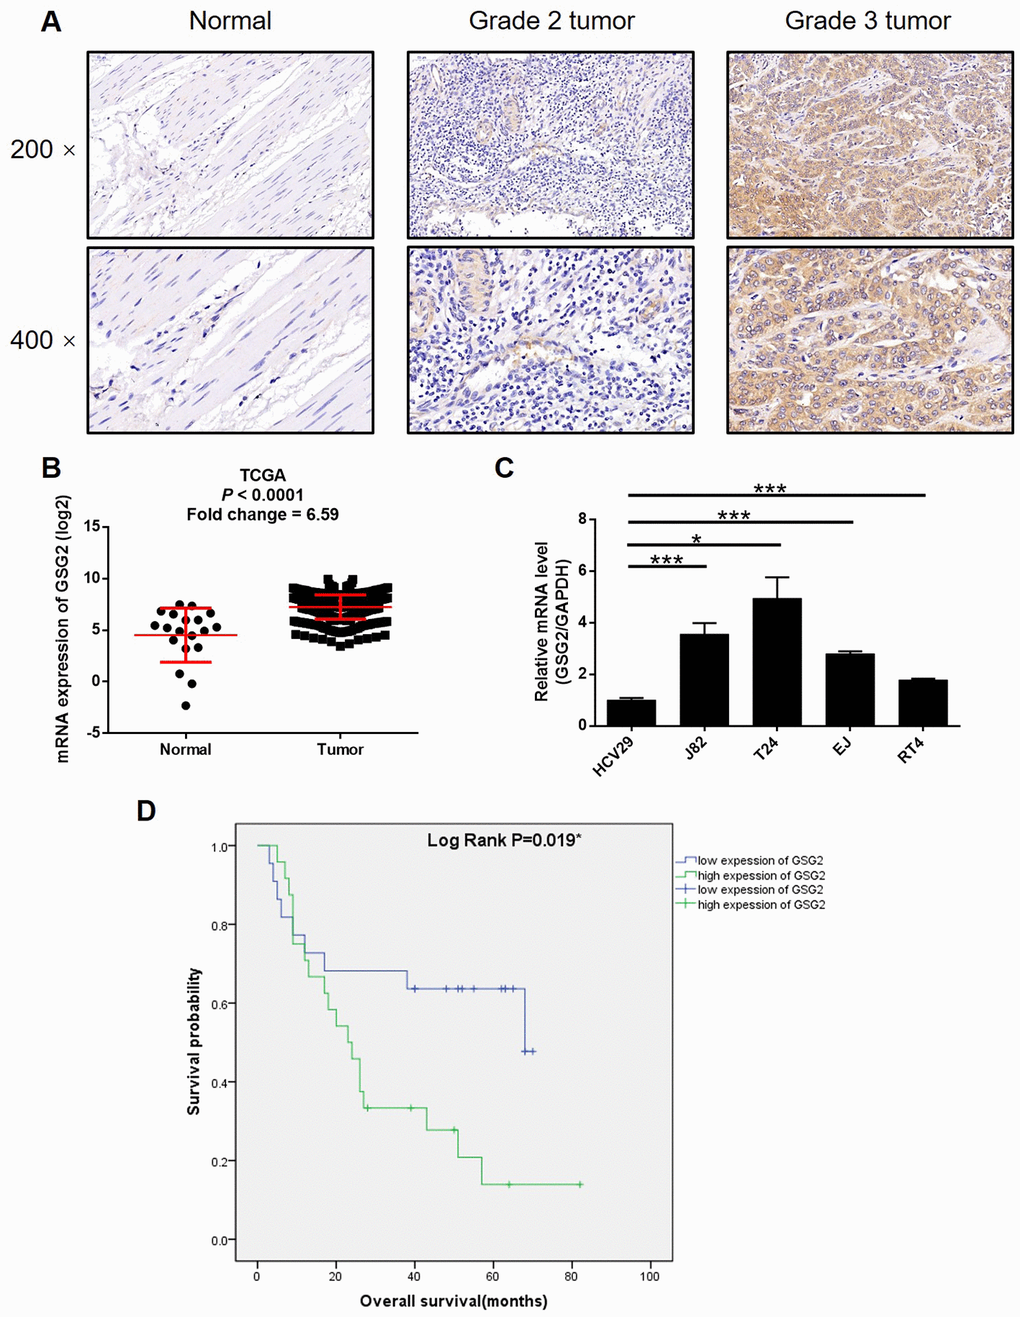 GSG2 was up-regulated in bladder cancer. (A) The expression of GSG2 in bladder cancer tissues and normal tissues was detected by IHC. (B) Data mining of TCGA database showed that expression of GSG2 is relatively higher in bladder cancer tissues compared with normal tissues. (C) Endogenous expression of GSG2 in human bladder epithelial cell line HCV29 and bladder cancer cell lines including RT4, EJ, T24 and J82 was detected by qPCR. (D) Kaplan-Meier survival analysis was performed to reveal the relationship between GSG2 expression and prognosis of bladder cancer patients. The figures are representative data from at least three independent experiments. The data were expressed as mean ± SD (n ≥ 3), *PPP